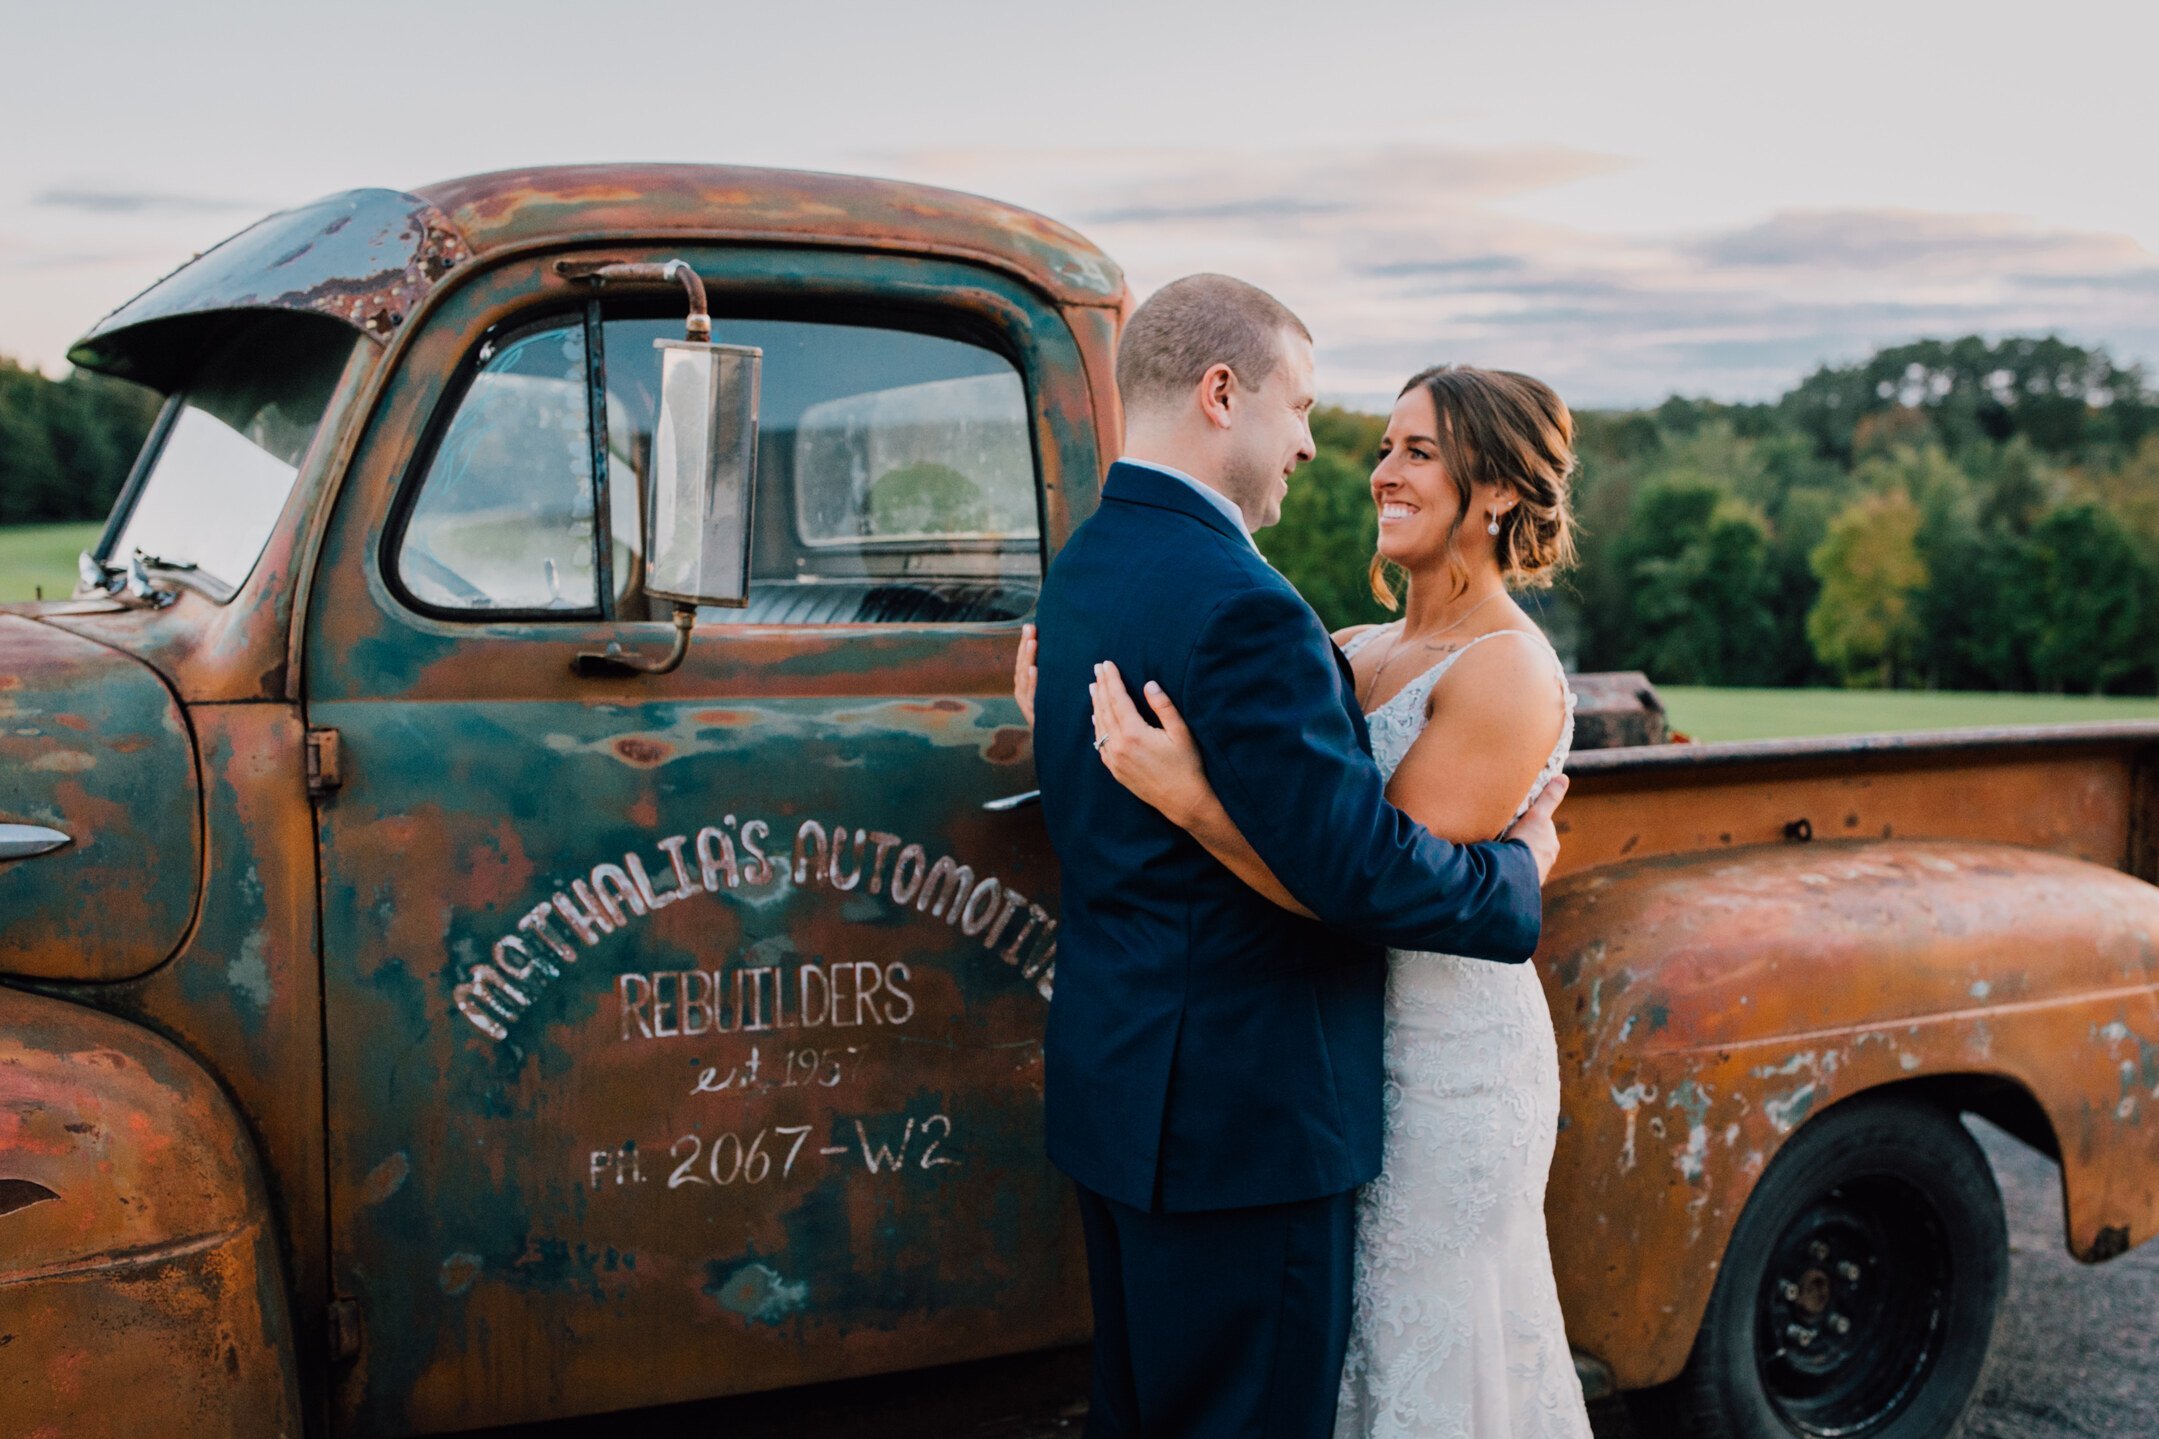  The bride and groom stand in front of a vintage truck during their rustic barn wedding 